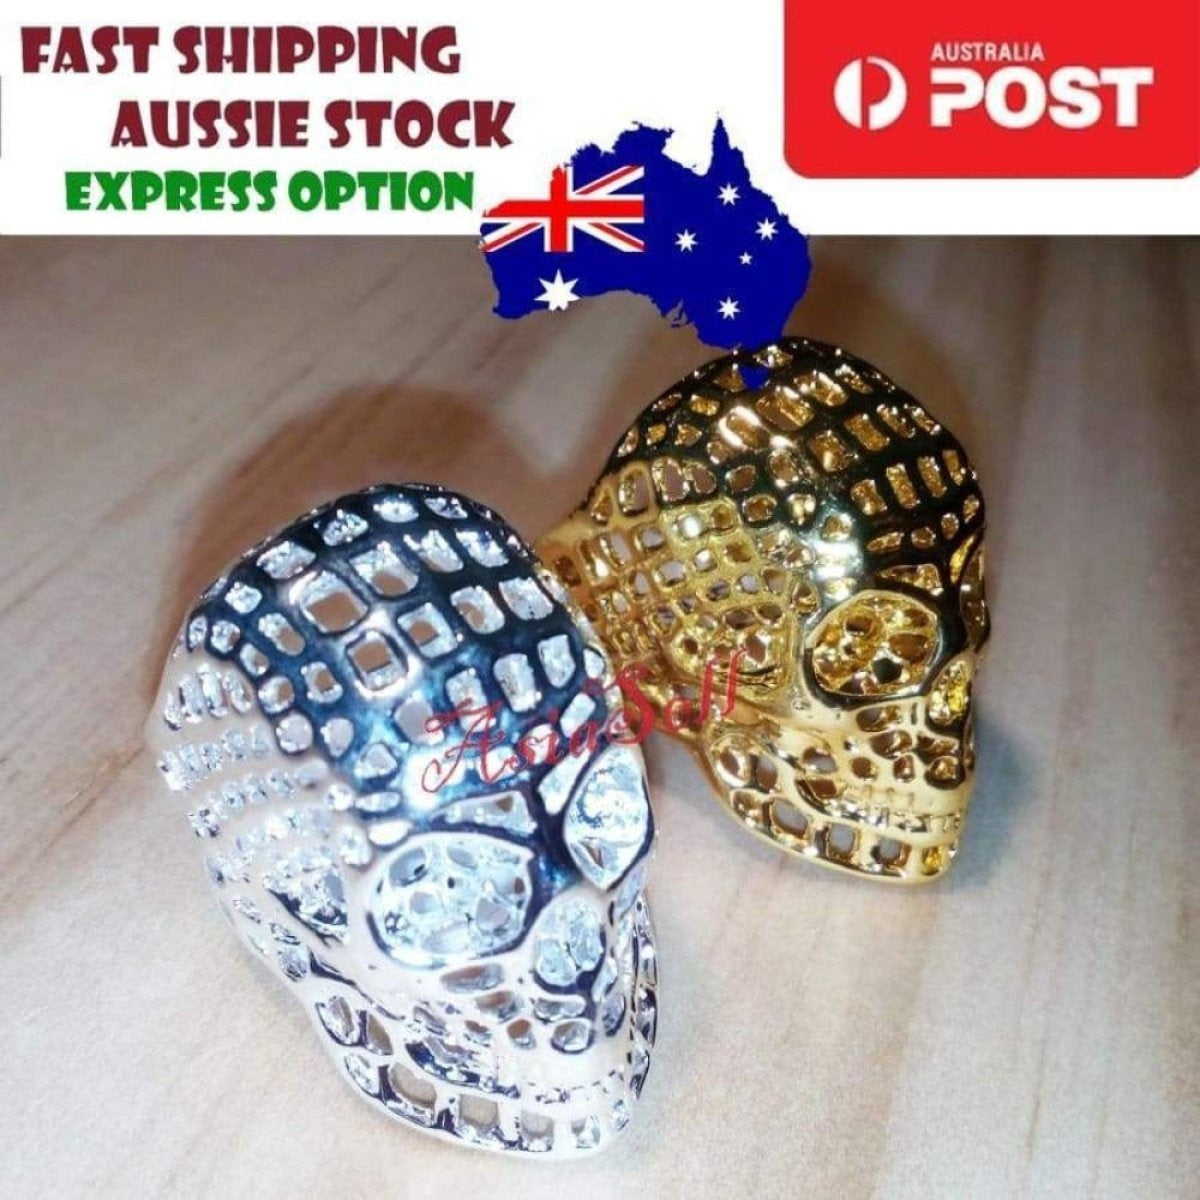 Stainless Steel Skull Ring Head Evil Ring Rings Black Silver Gold Silver Biker | Asia Sell  -  Type 4 GOLD Size 9 U.S. 59mm